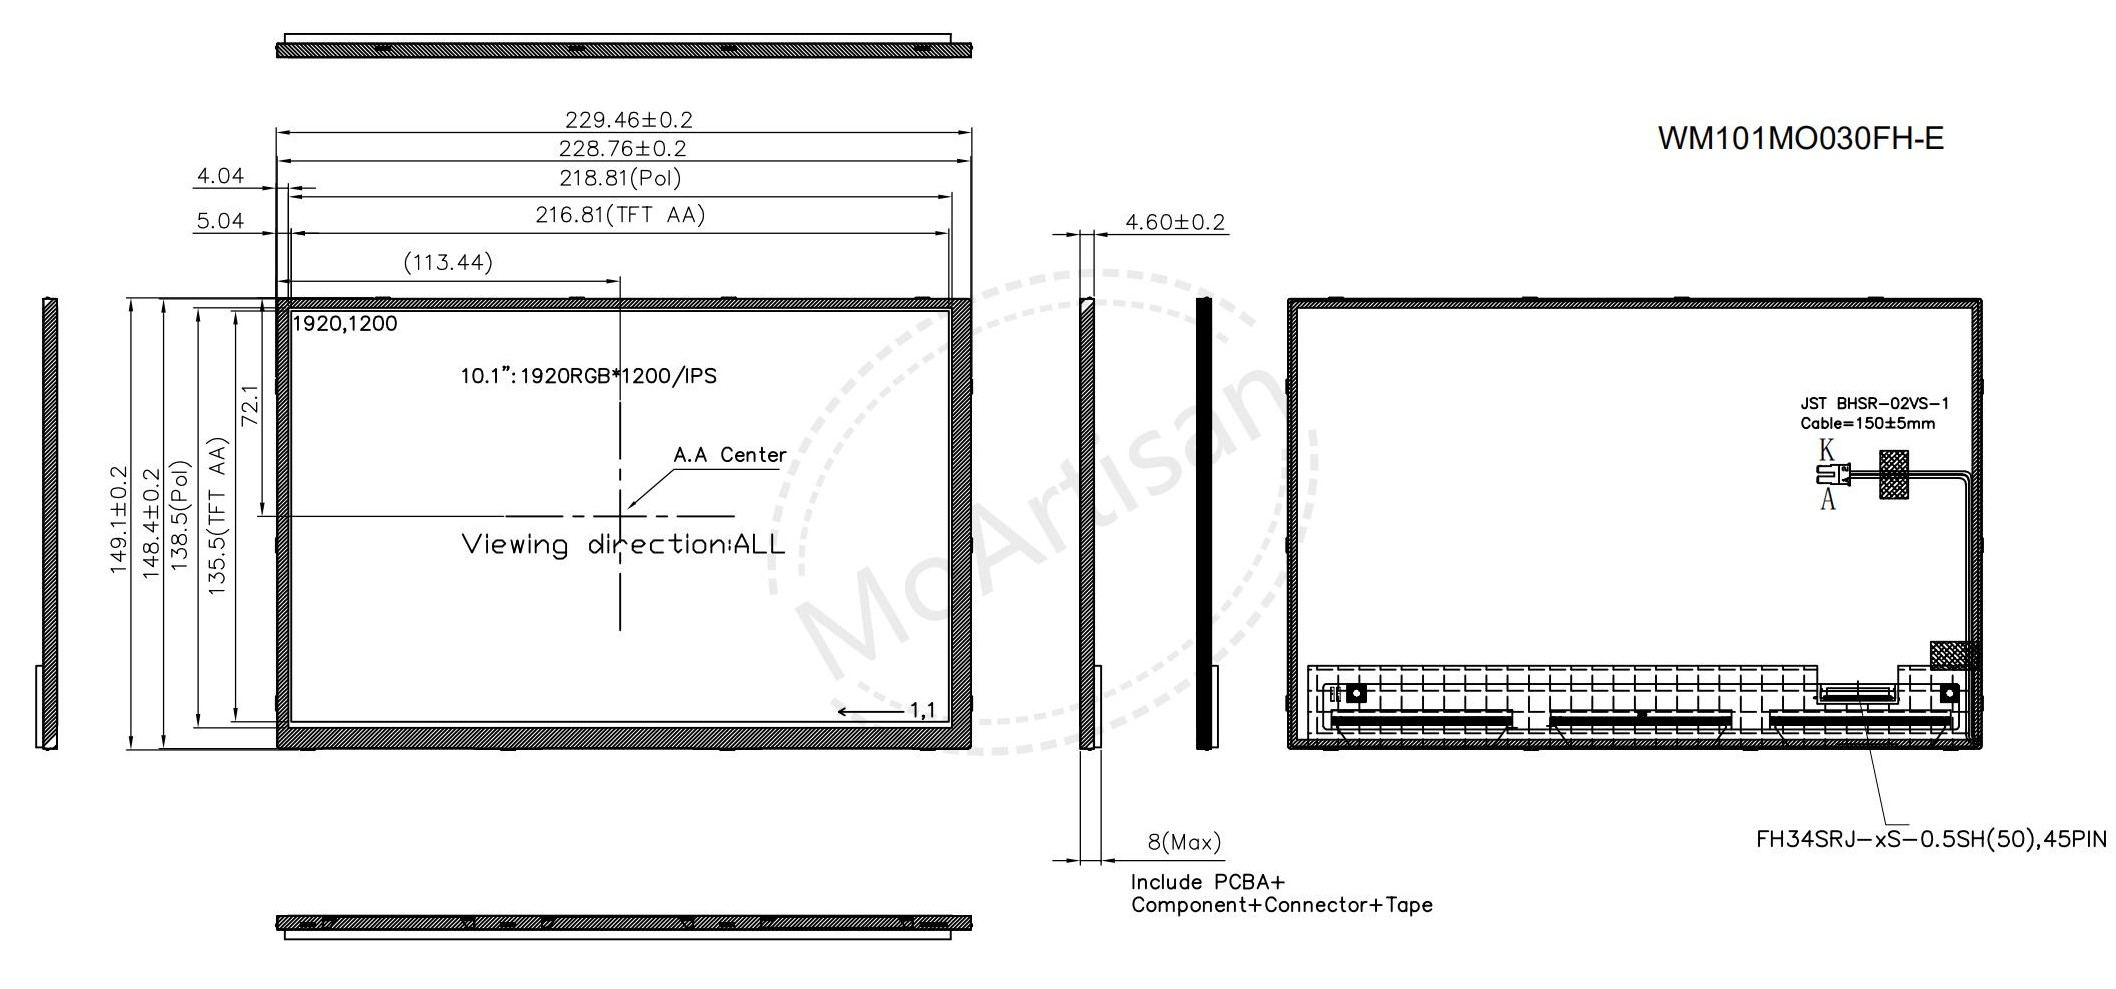 E-Ver, 10.1 Inch 1920RGB1200 module without up bezel drawings